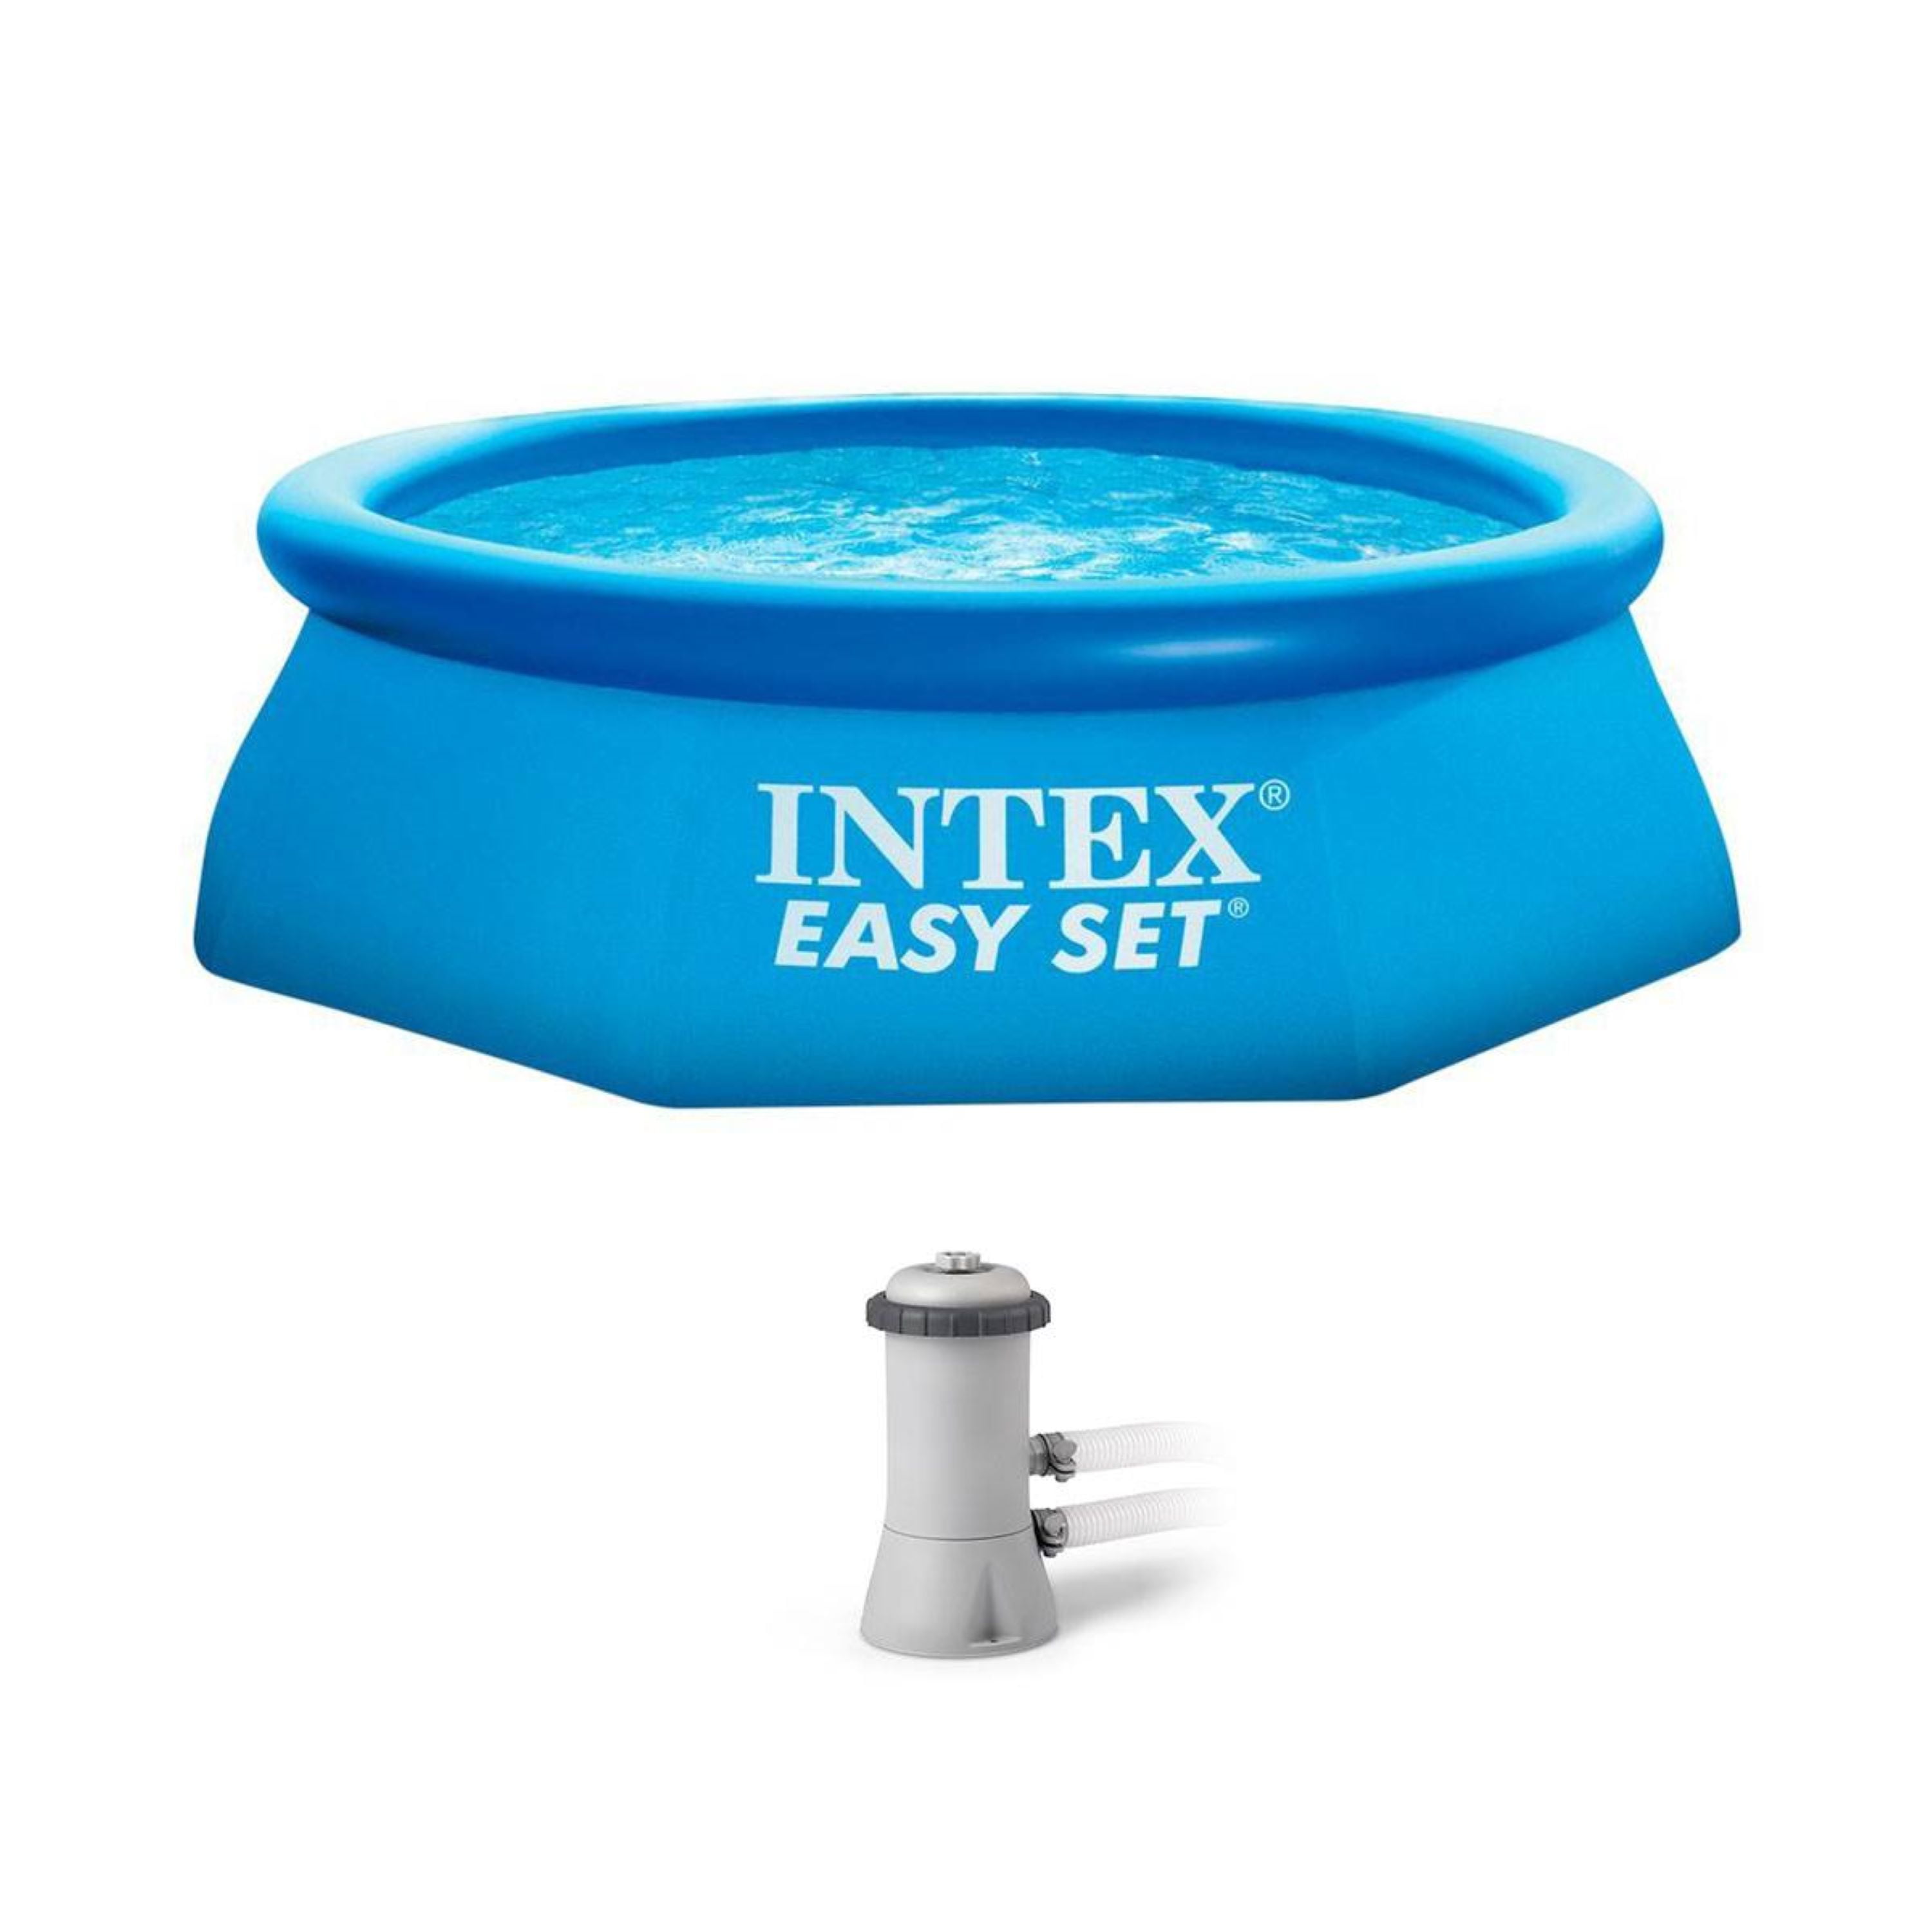 Intex 8’ x 30” Easy Set Pool Round Above Ground Inflatable NO PUMP⚡️ 